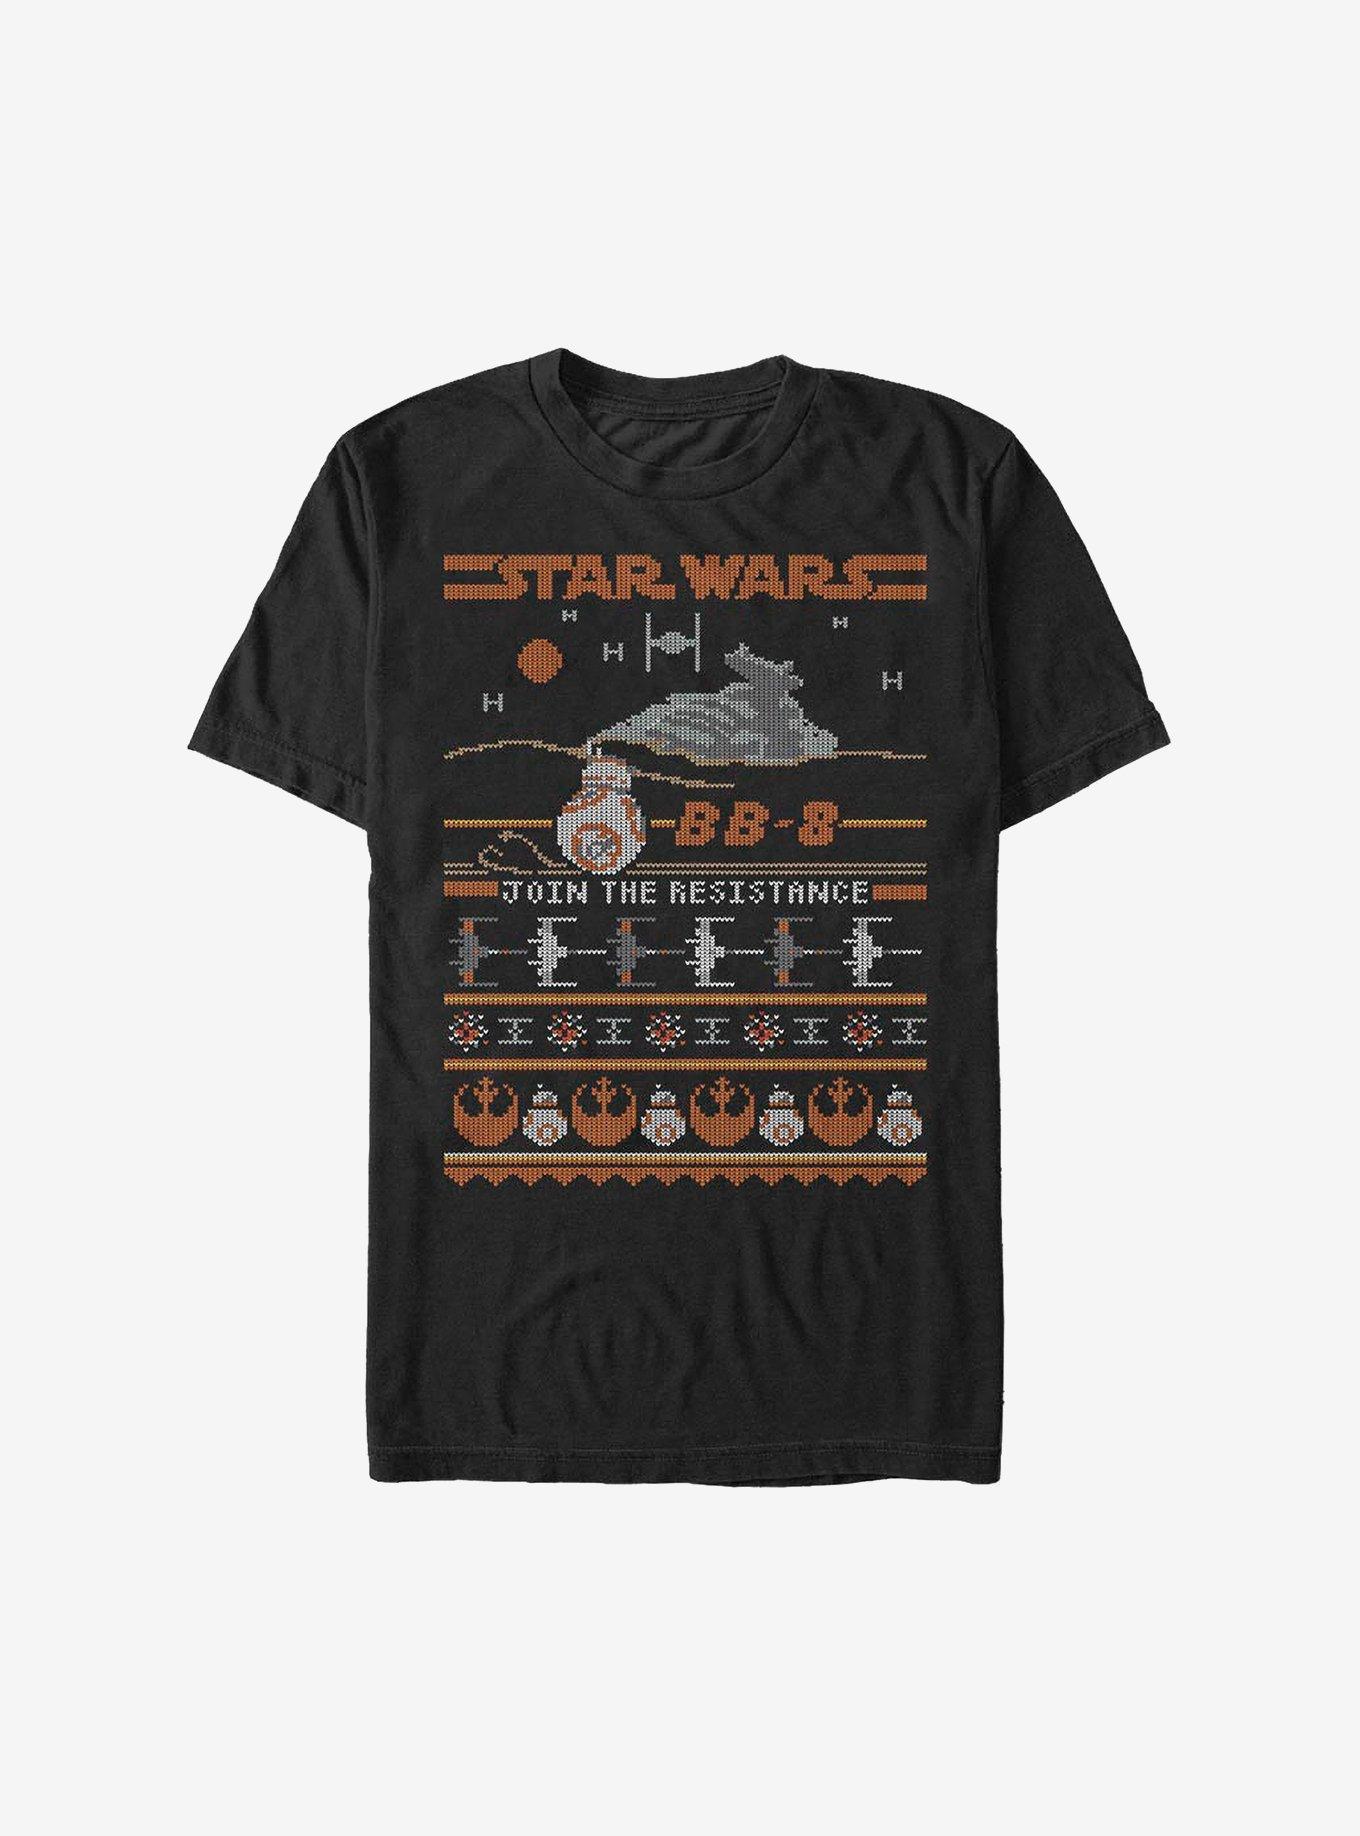 Star Wars Episode VII The Force Awakens Ugly Christmas Sweater T-Shirt